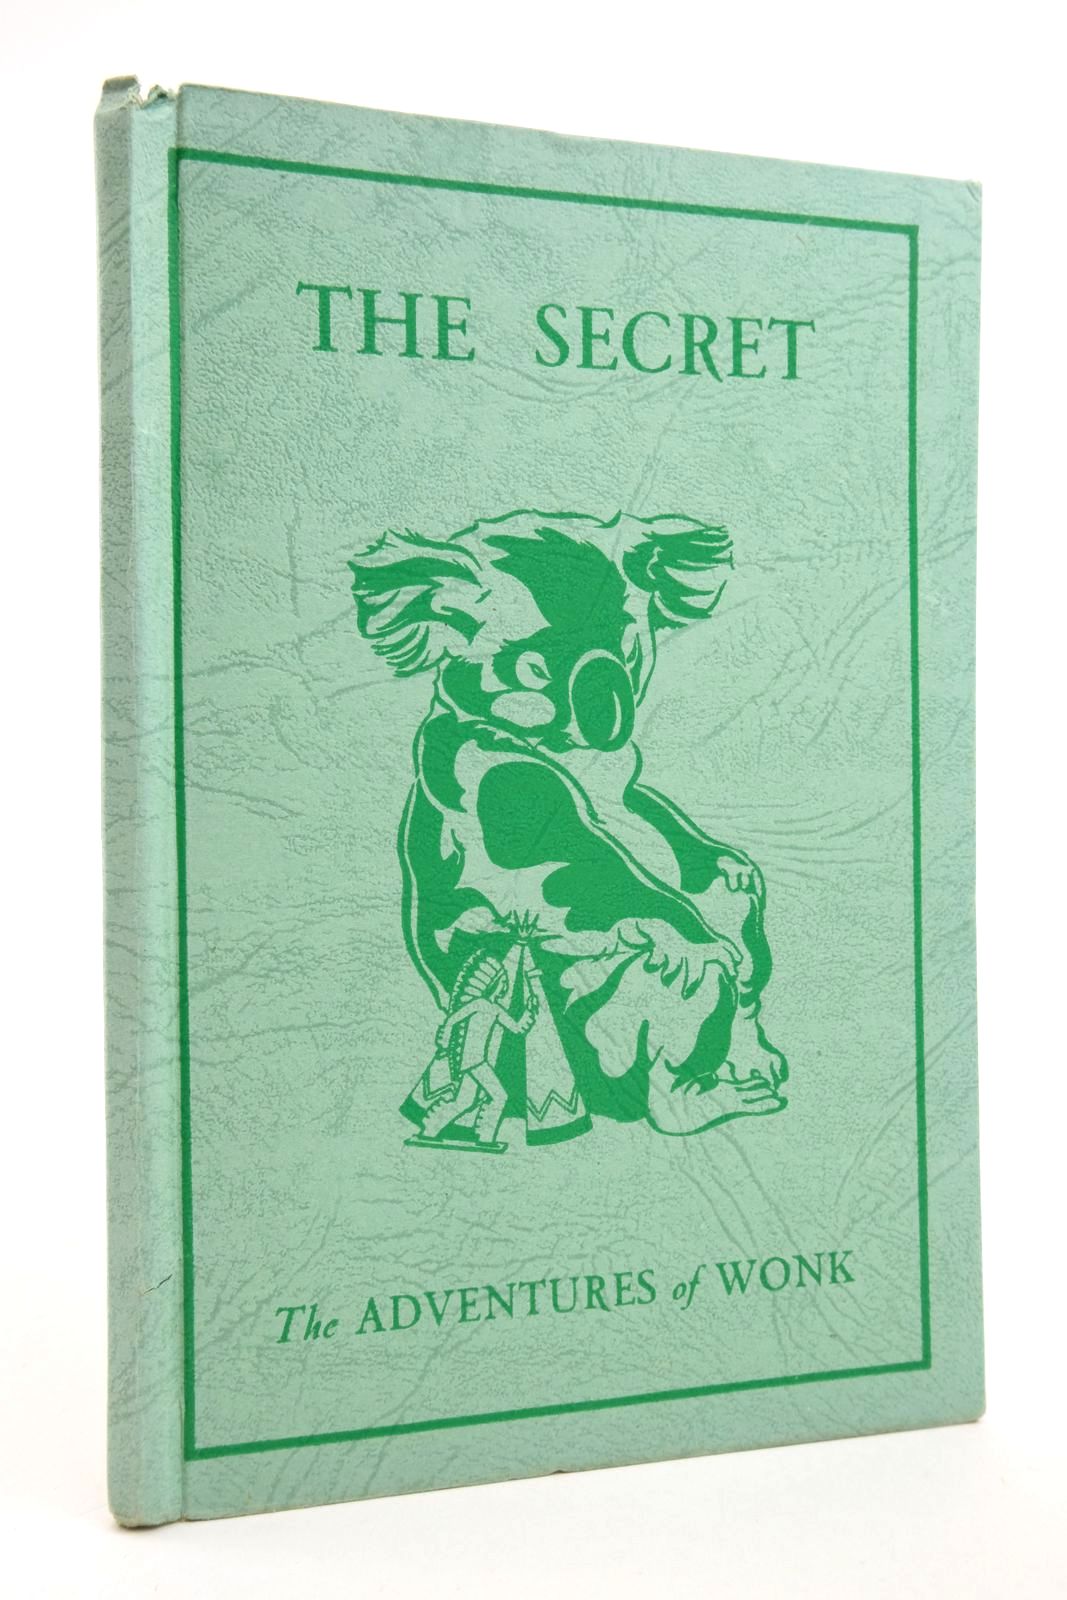 Photo of THE ADVENTURES OF WONK - THE SECRET written by Levy, Muriel illustrated by Kiddell-Monroe, Joan published by Wills & Hepworth Ltd. (STOCK CODE: 2136916)  for sale by Stella & Rose's Books